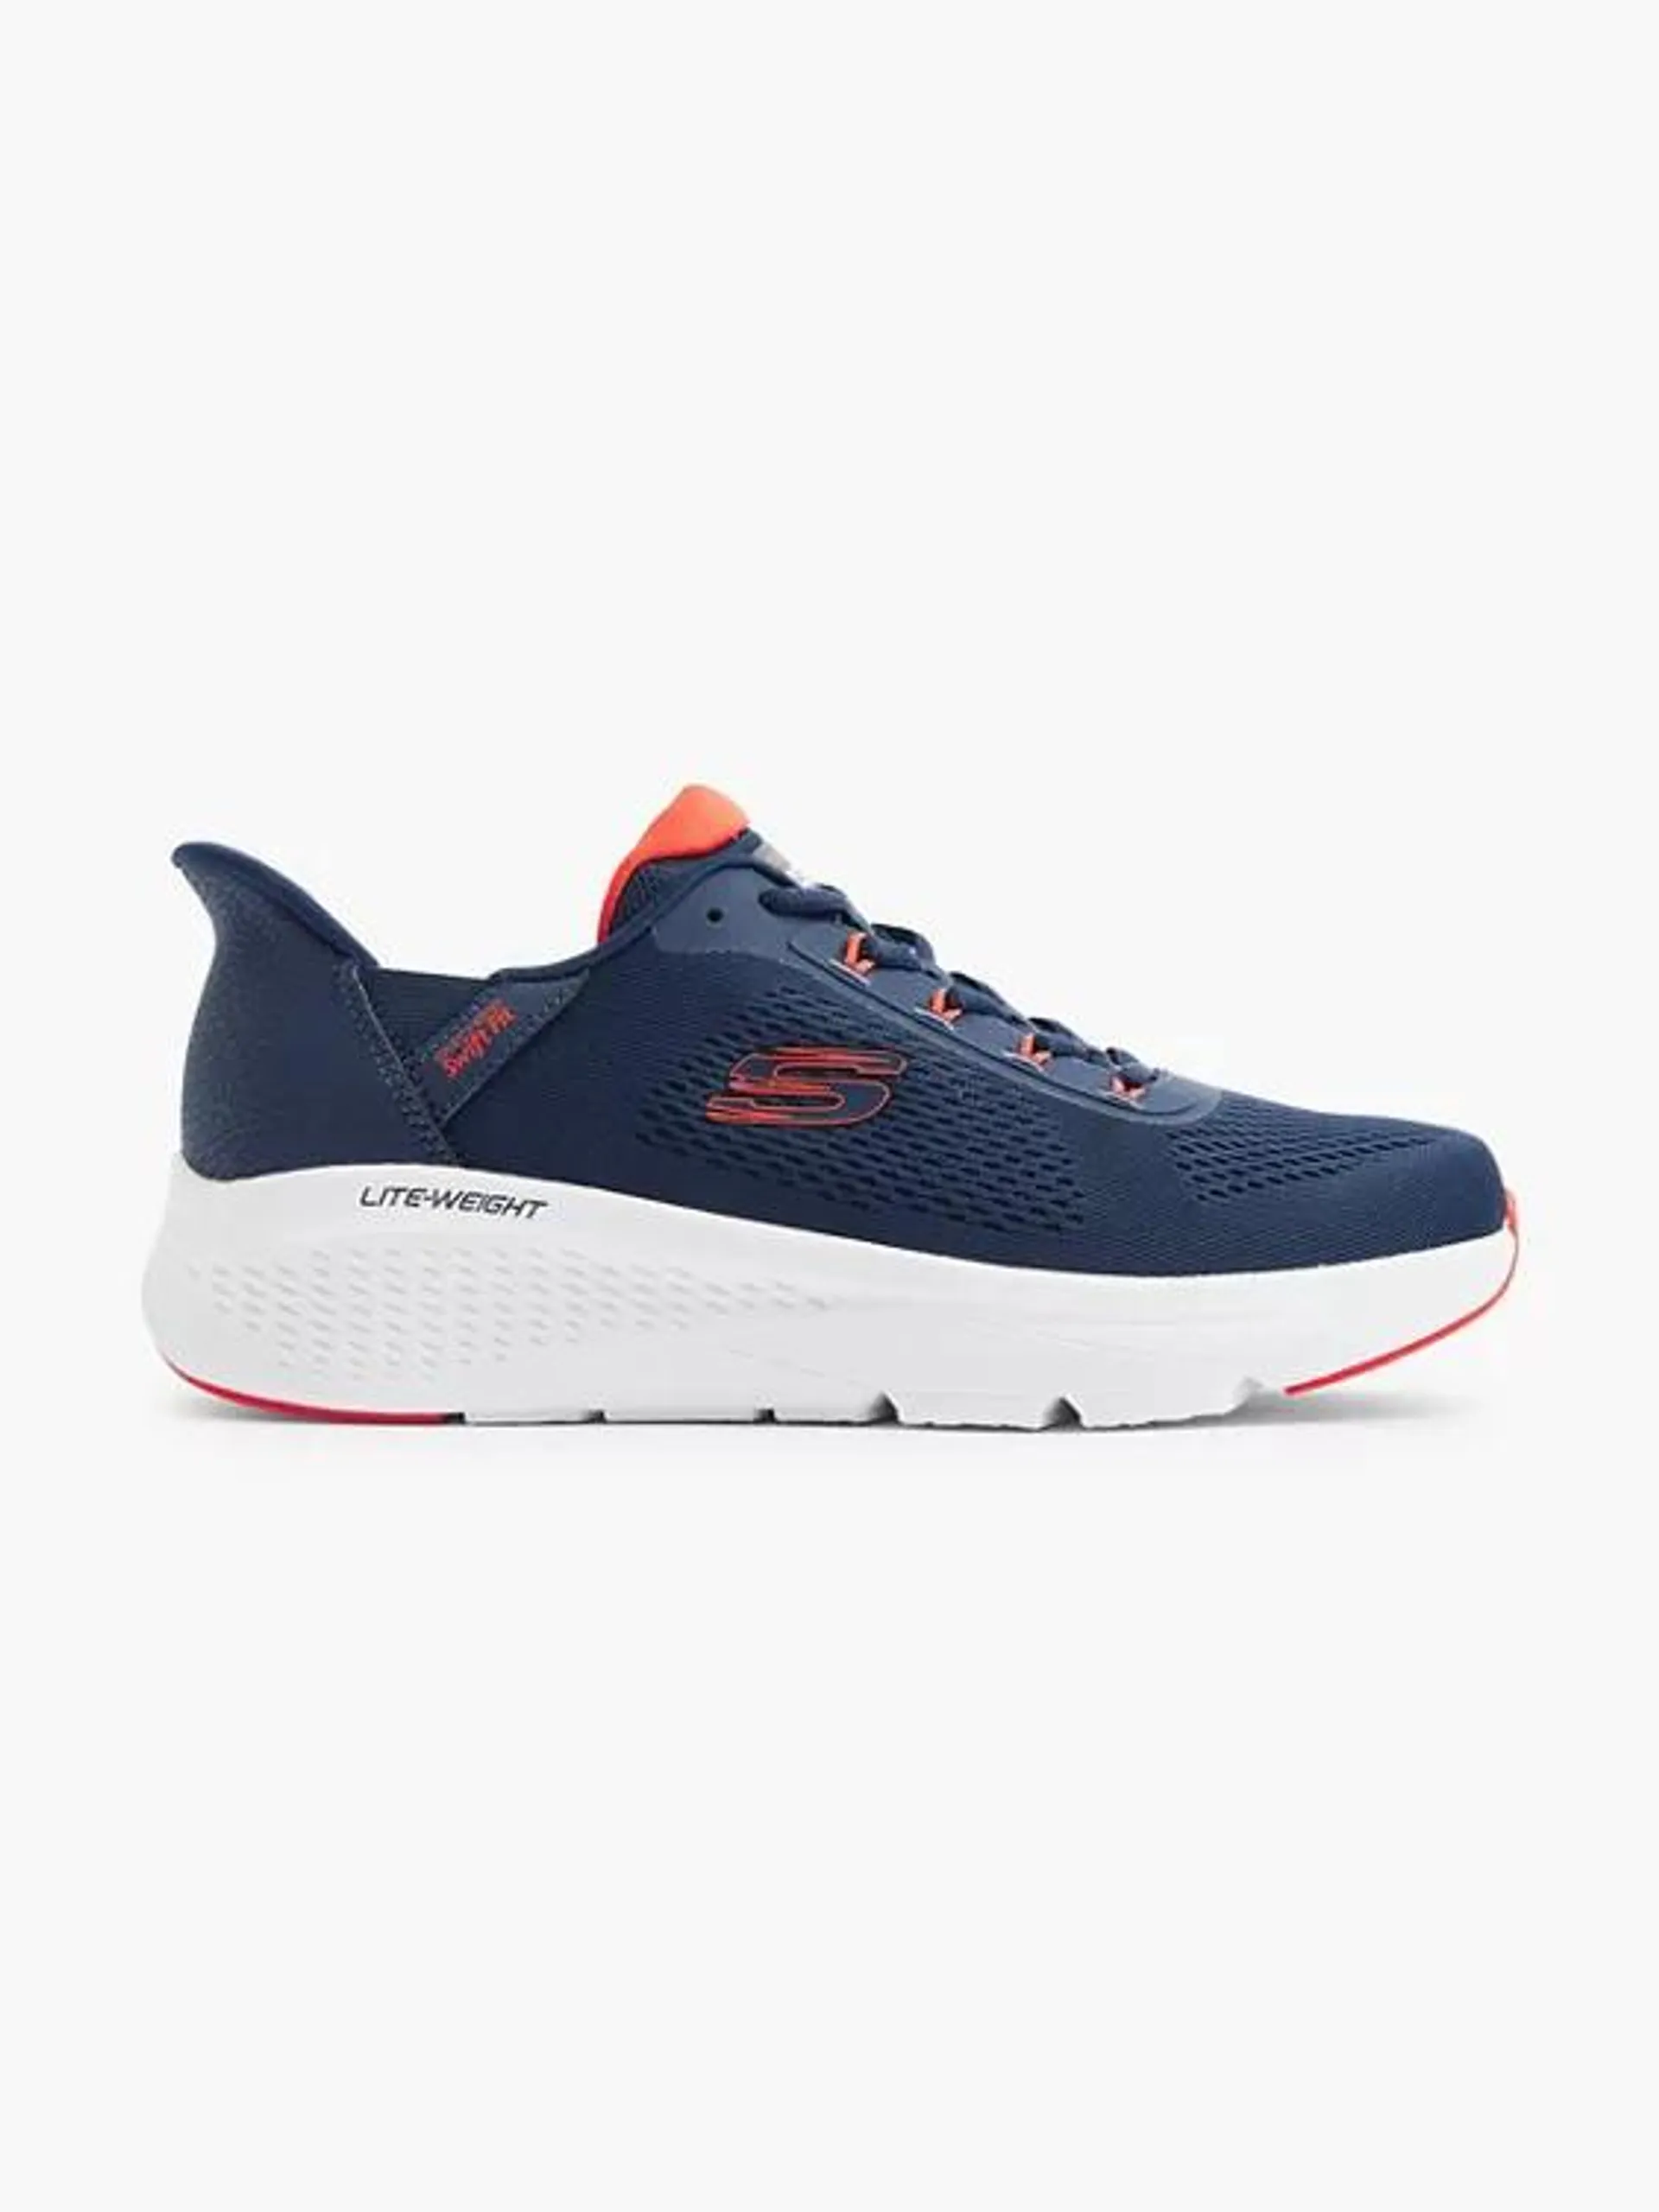 Swift Fit Hands Free Skechers Navy/Orange Lace Up Trainers